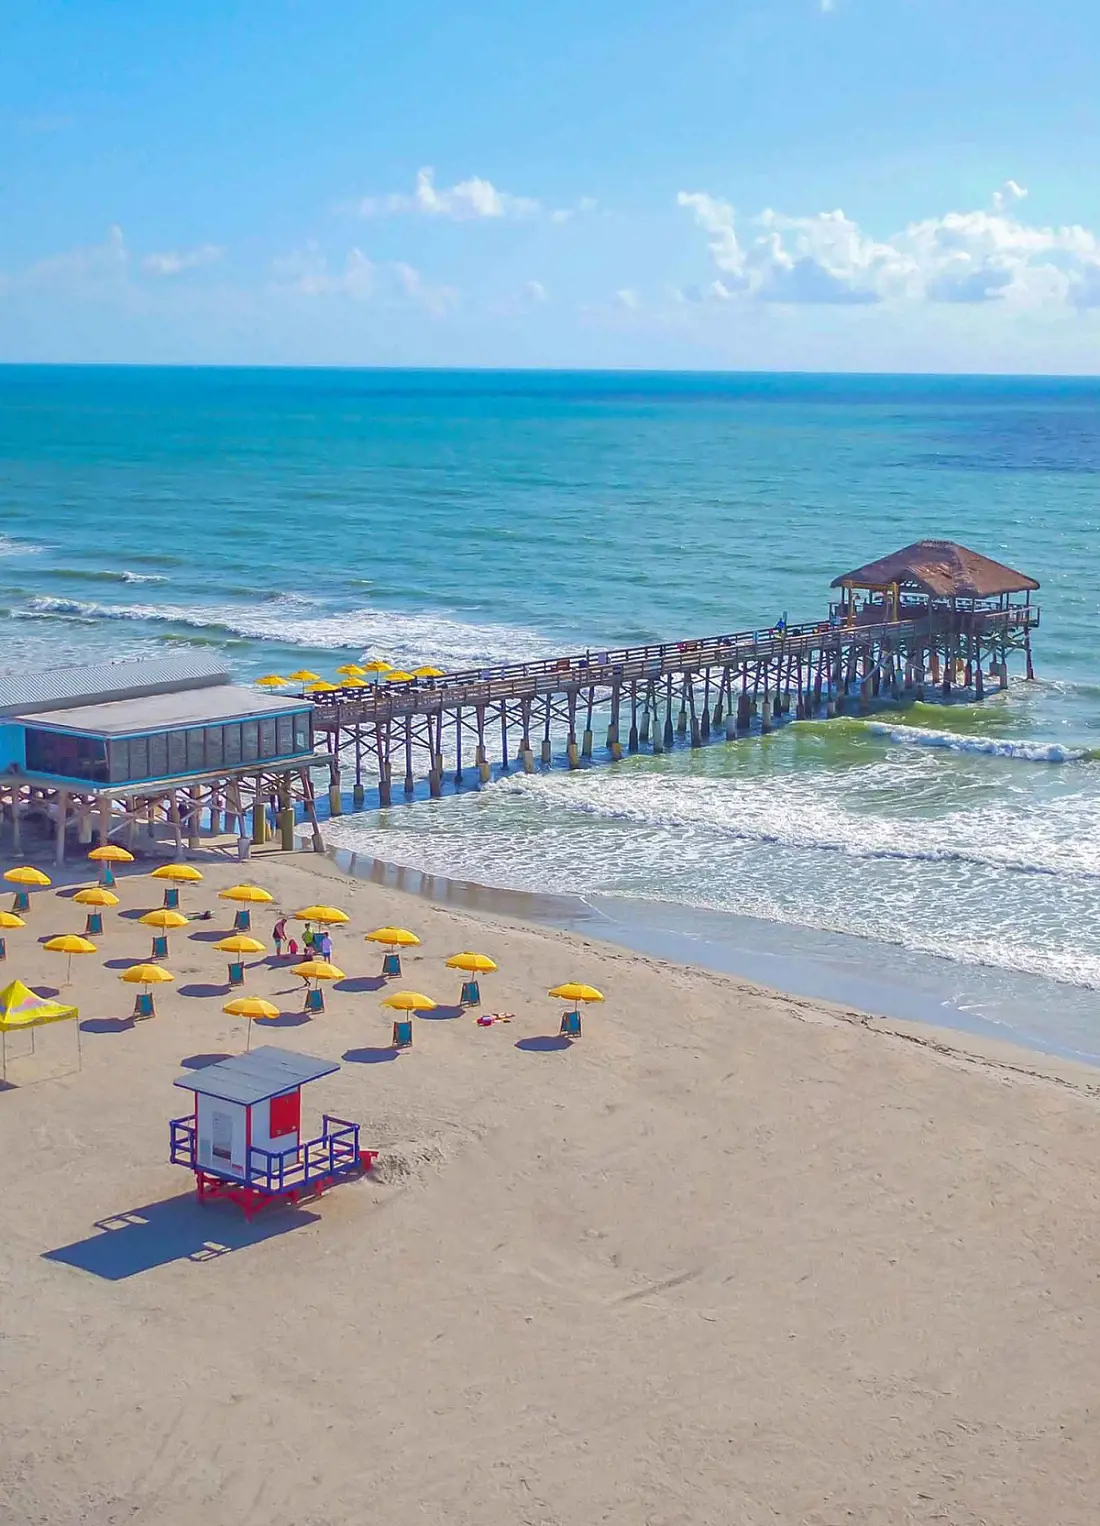 Westgate Cocoa Beach Pier is also known as Canaveral Pier